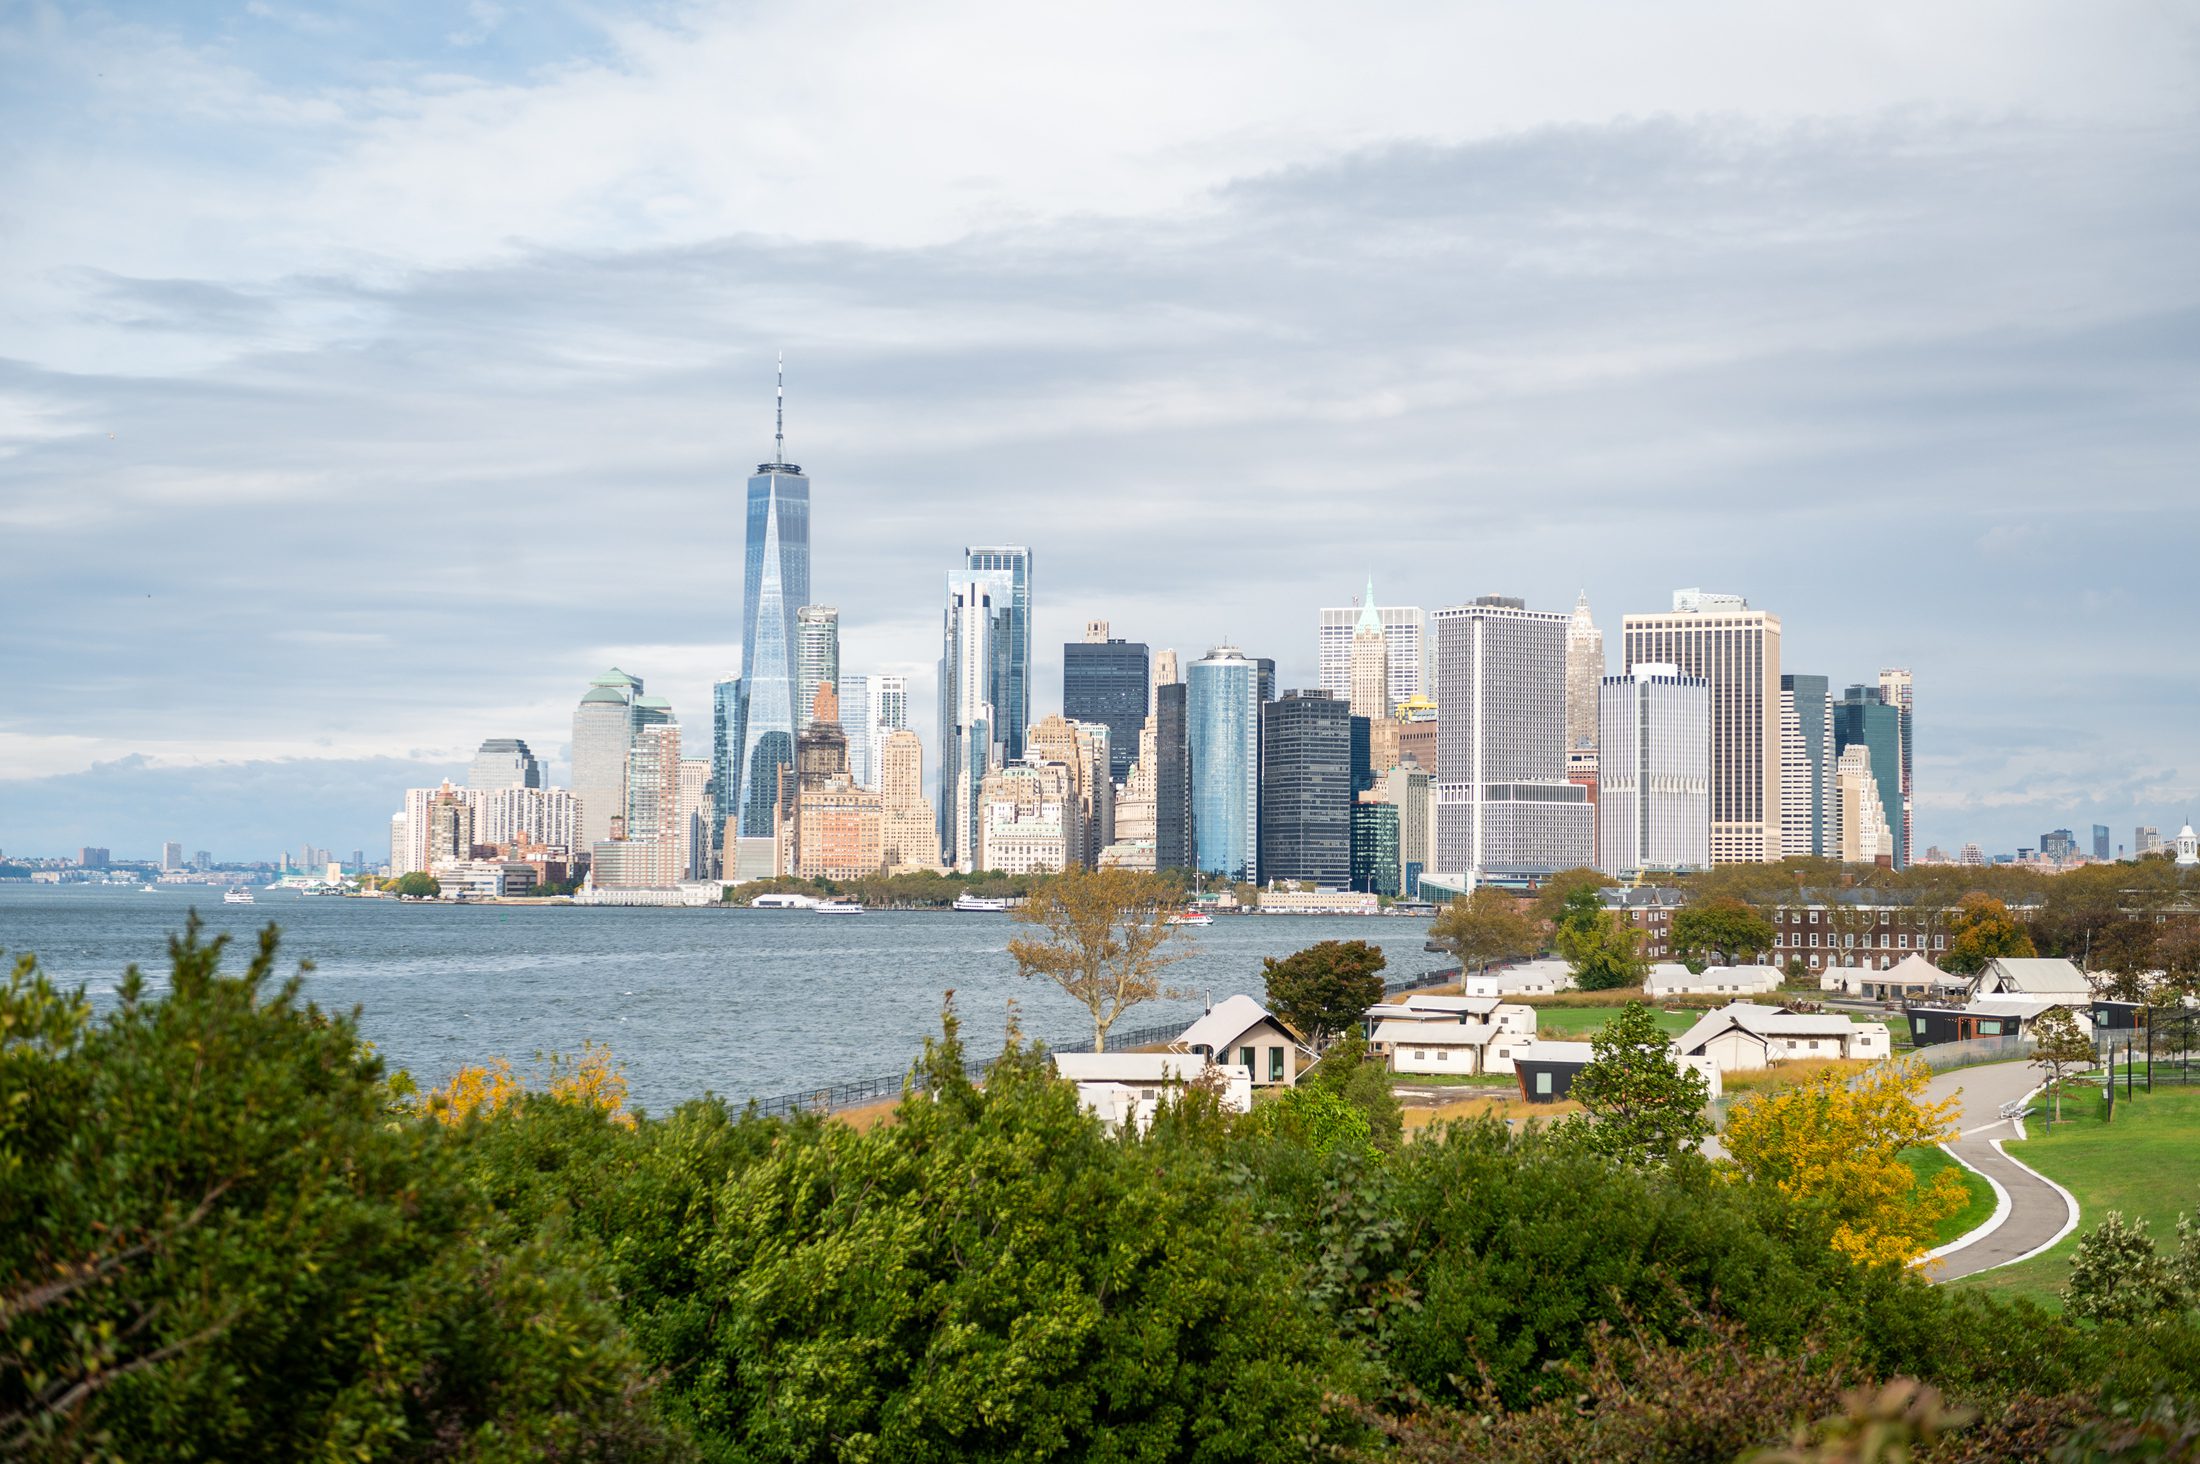 The view of the NYC skyline from the top of Governors Island